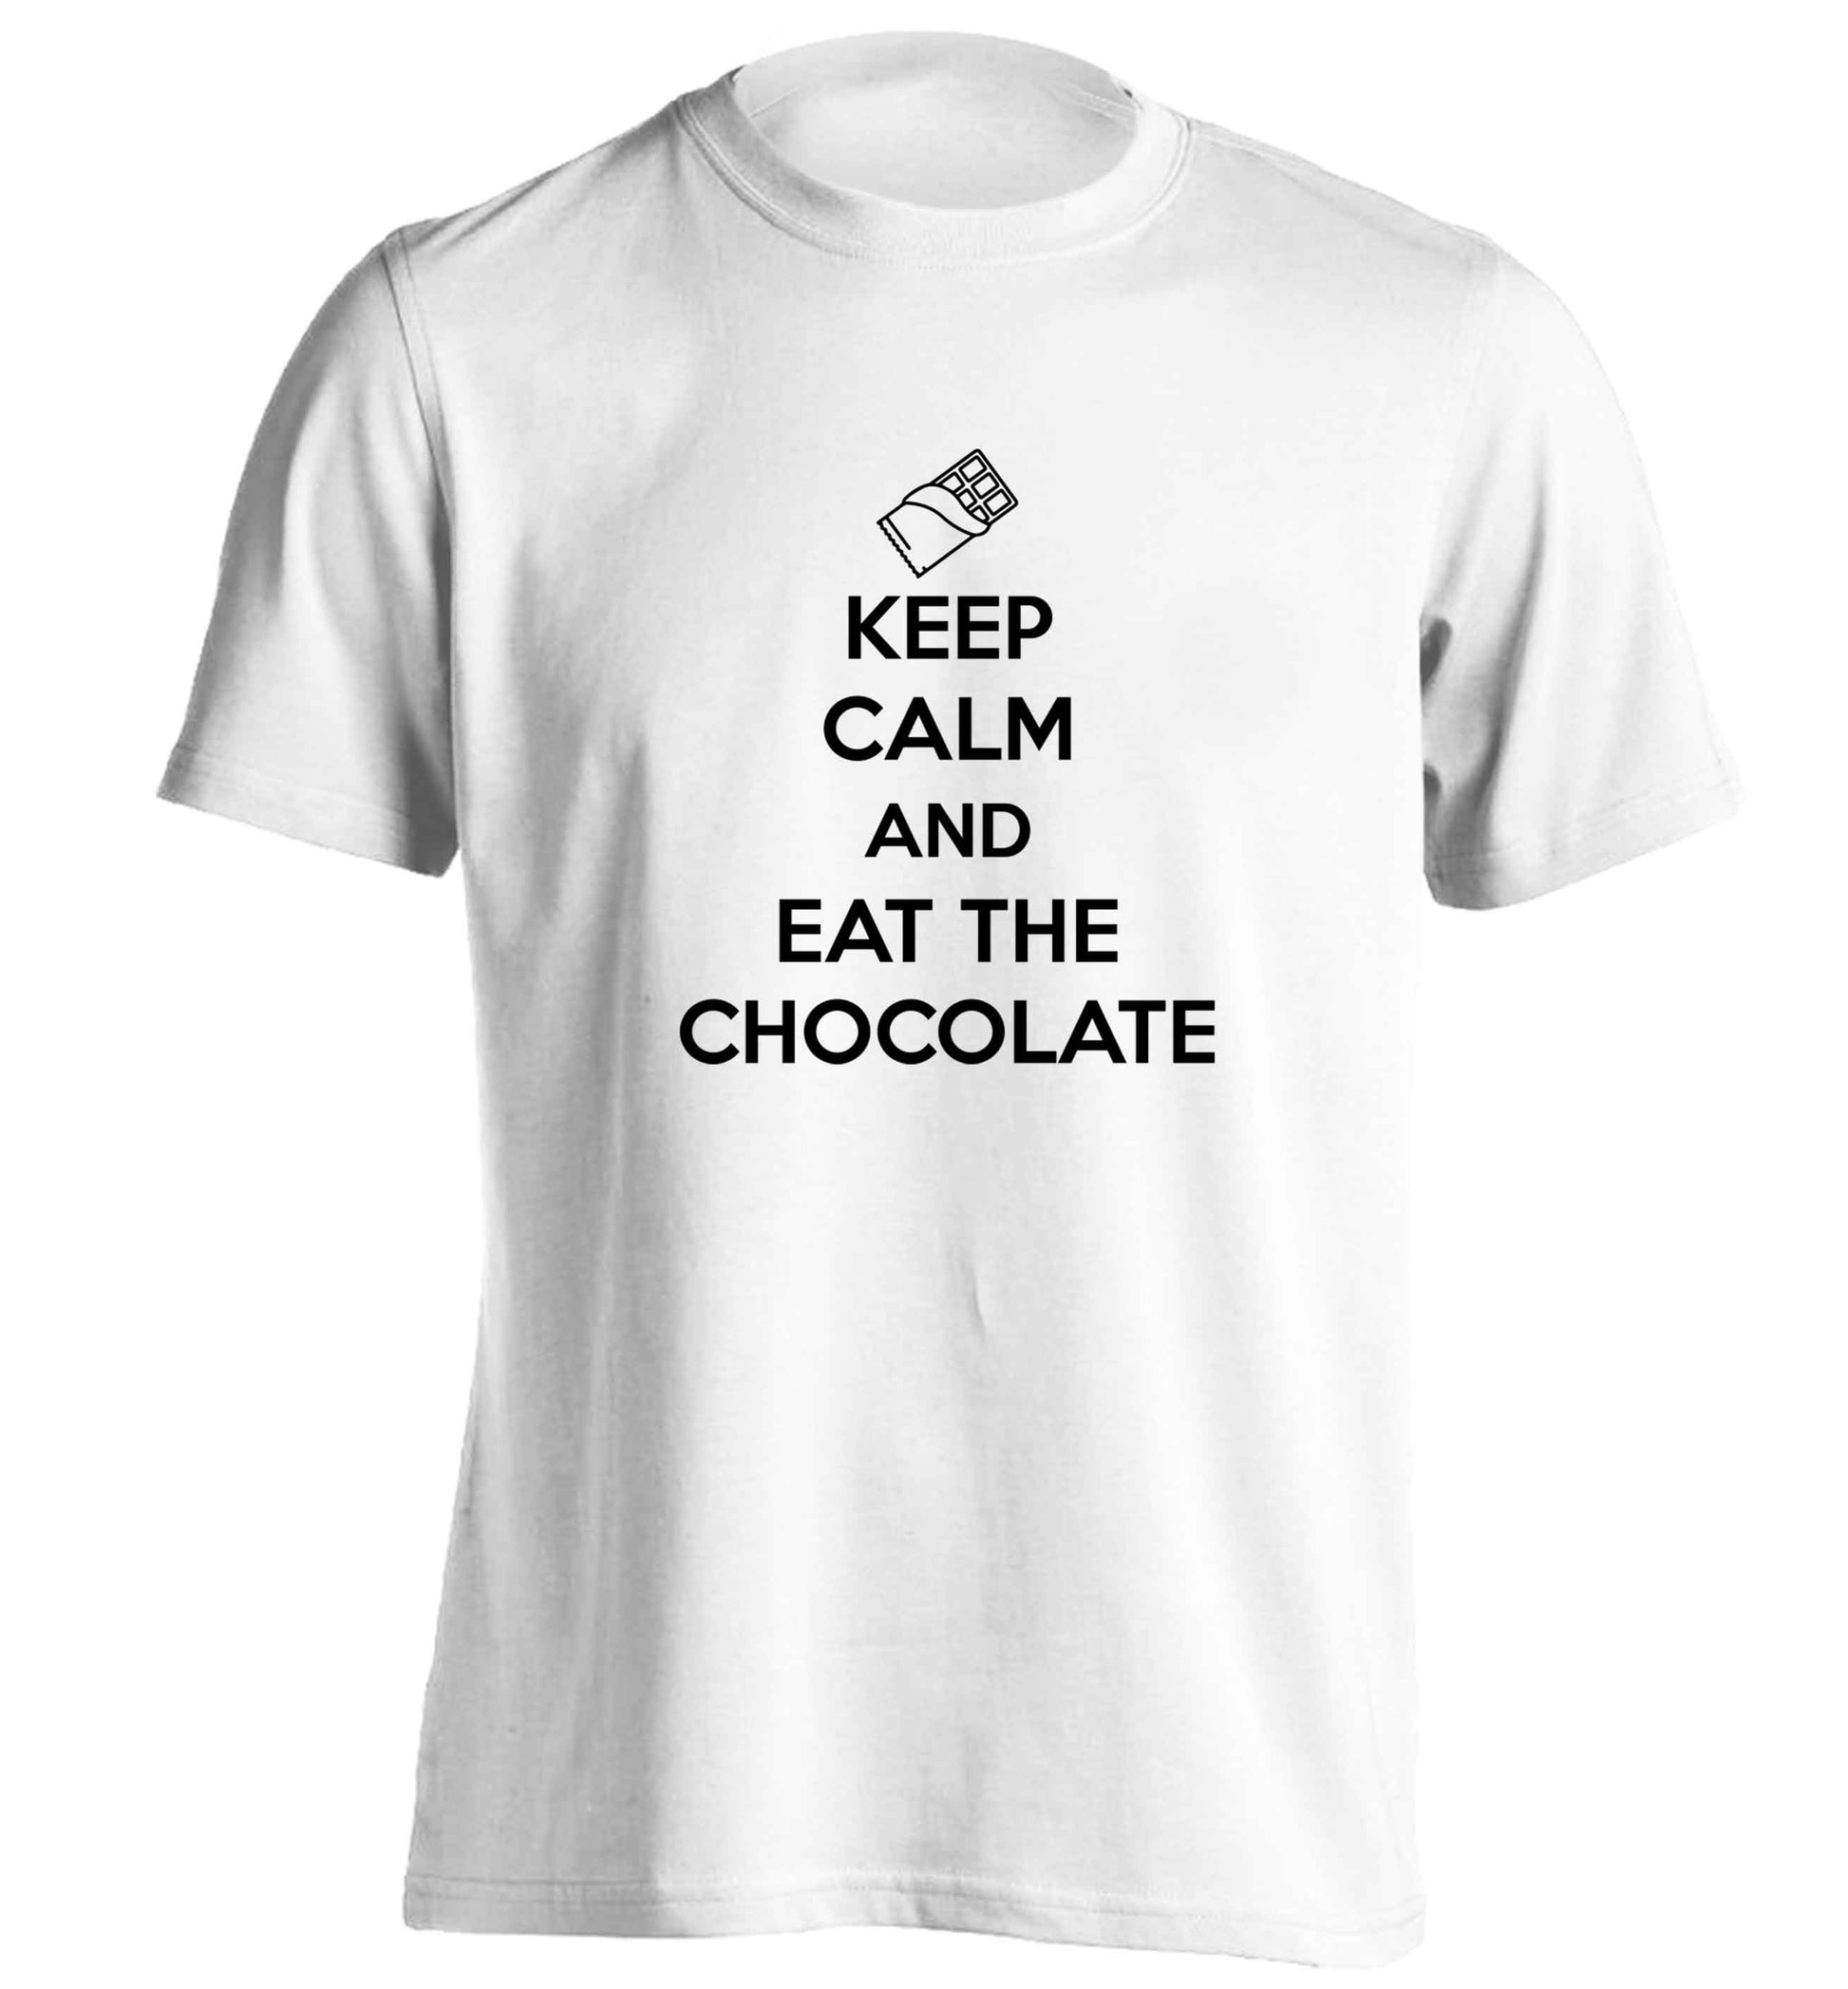 funny gift for a chocaholic! Keep calm and eat the chocolate adults unisex white Tshirt 2XL